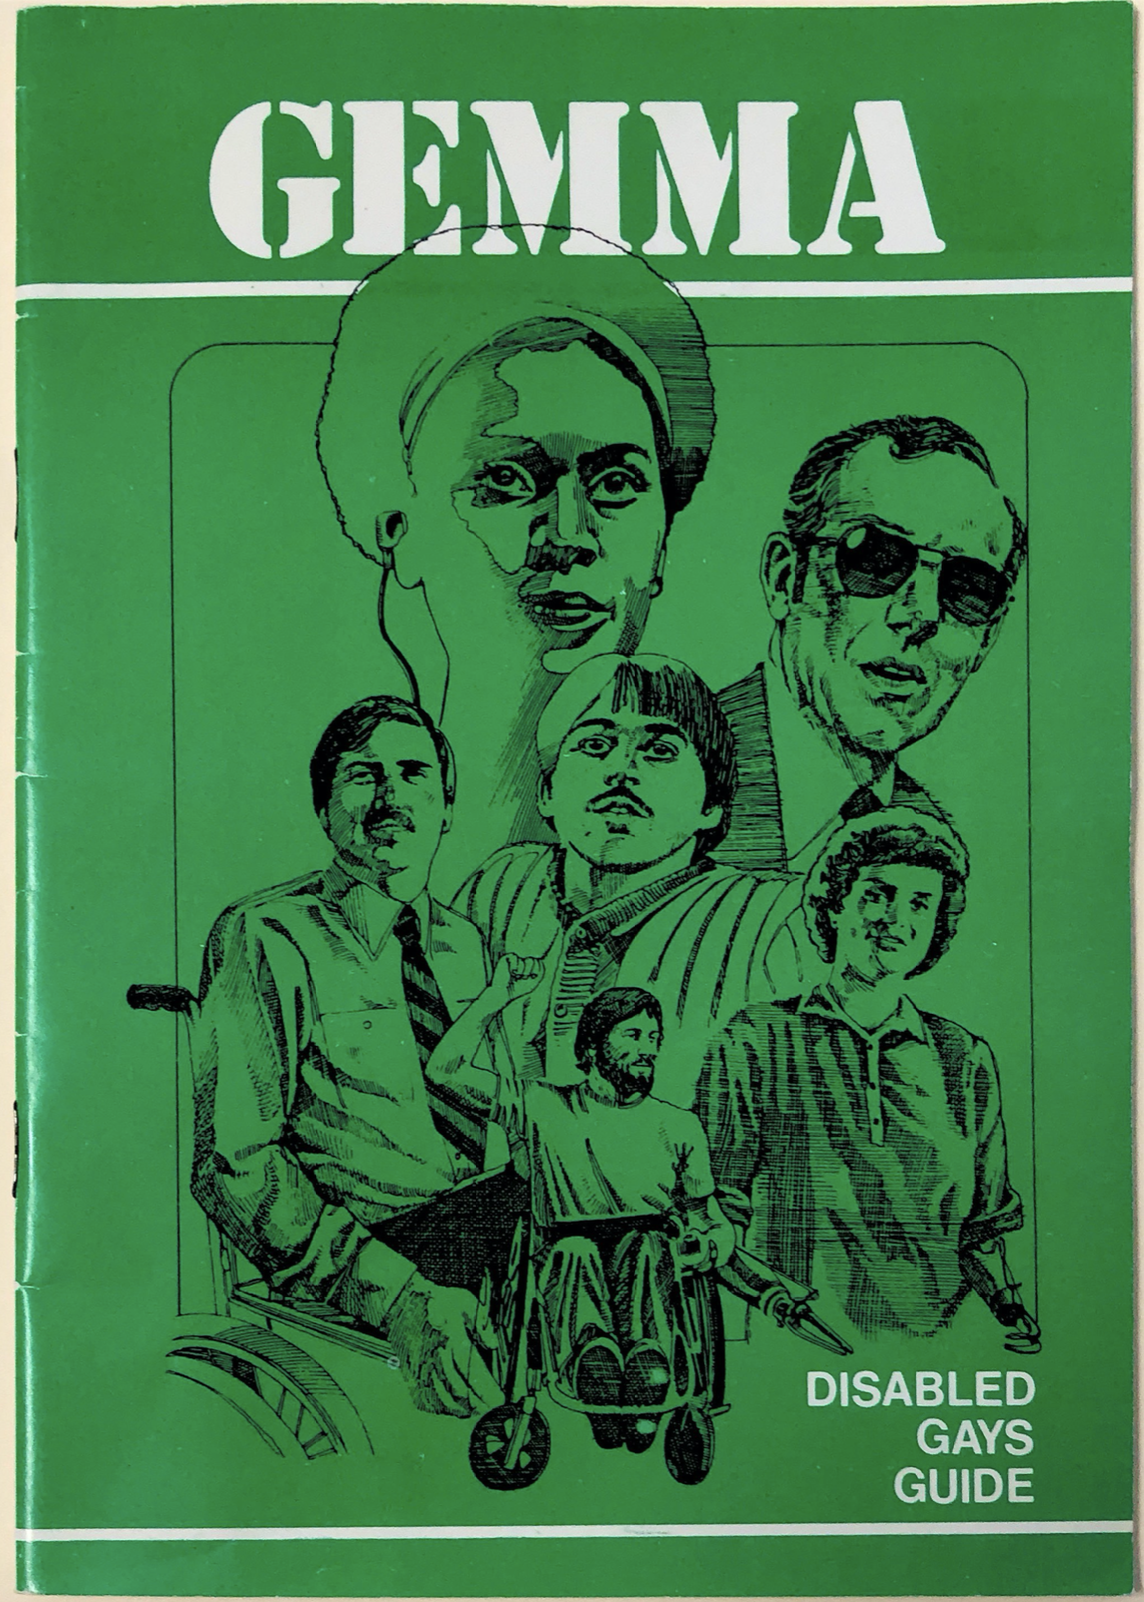 GEMMA Disabled Gays Guide cover in emerald green, featuring organisation’s name in white block text at top centre. Below this, overlapping beneath the organisation name, an illustration of several people with different disabilities – some visible, some invisible – drawn from different perspectives, looking at us. At the bottom right, the guide title is in white all-caps. 